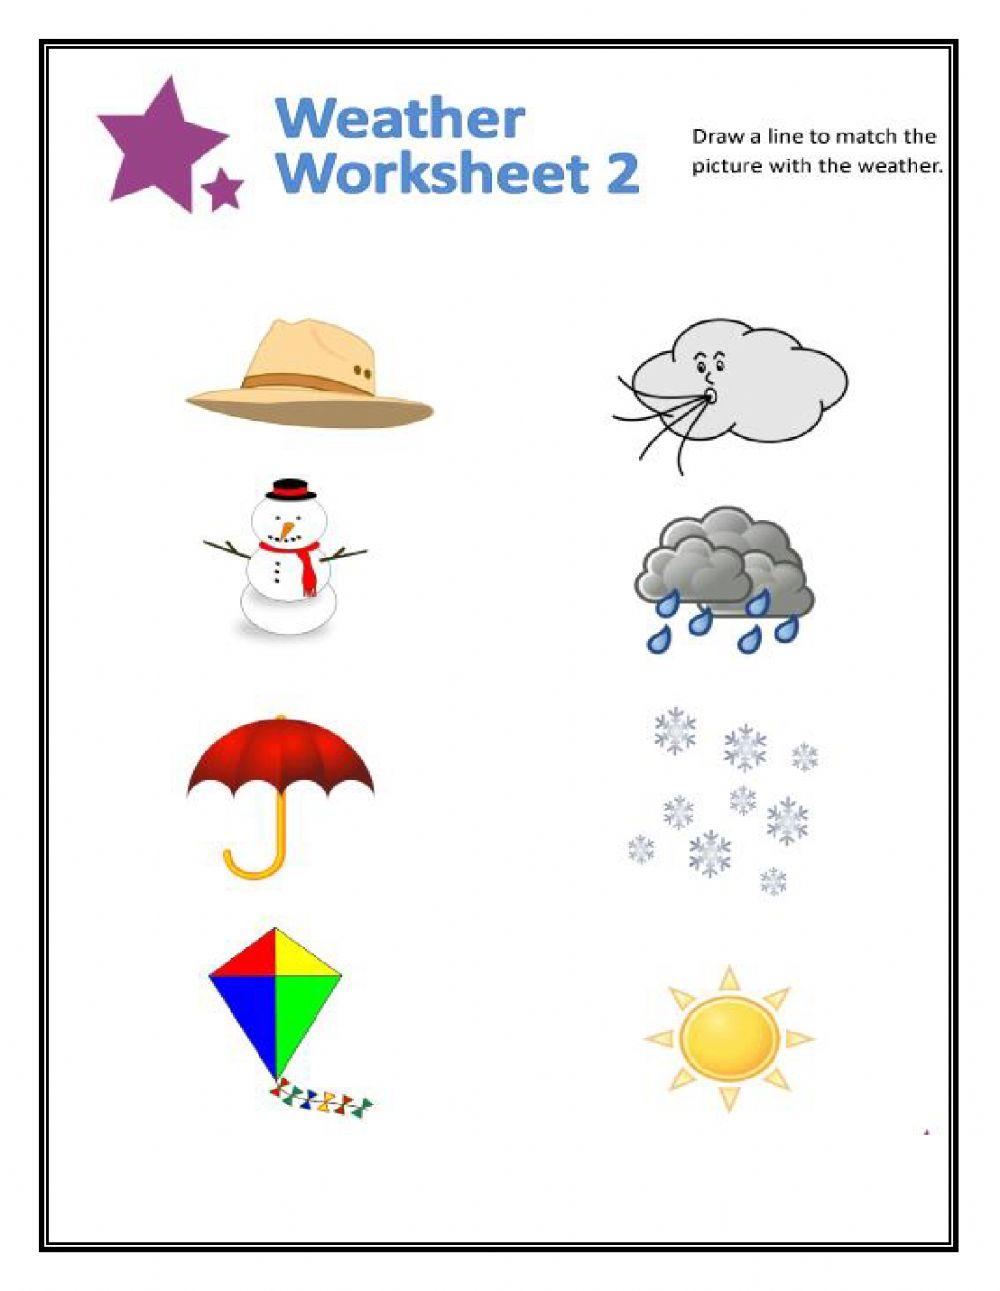 Weather WorkSheets